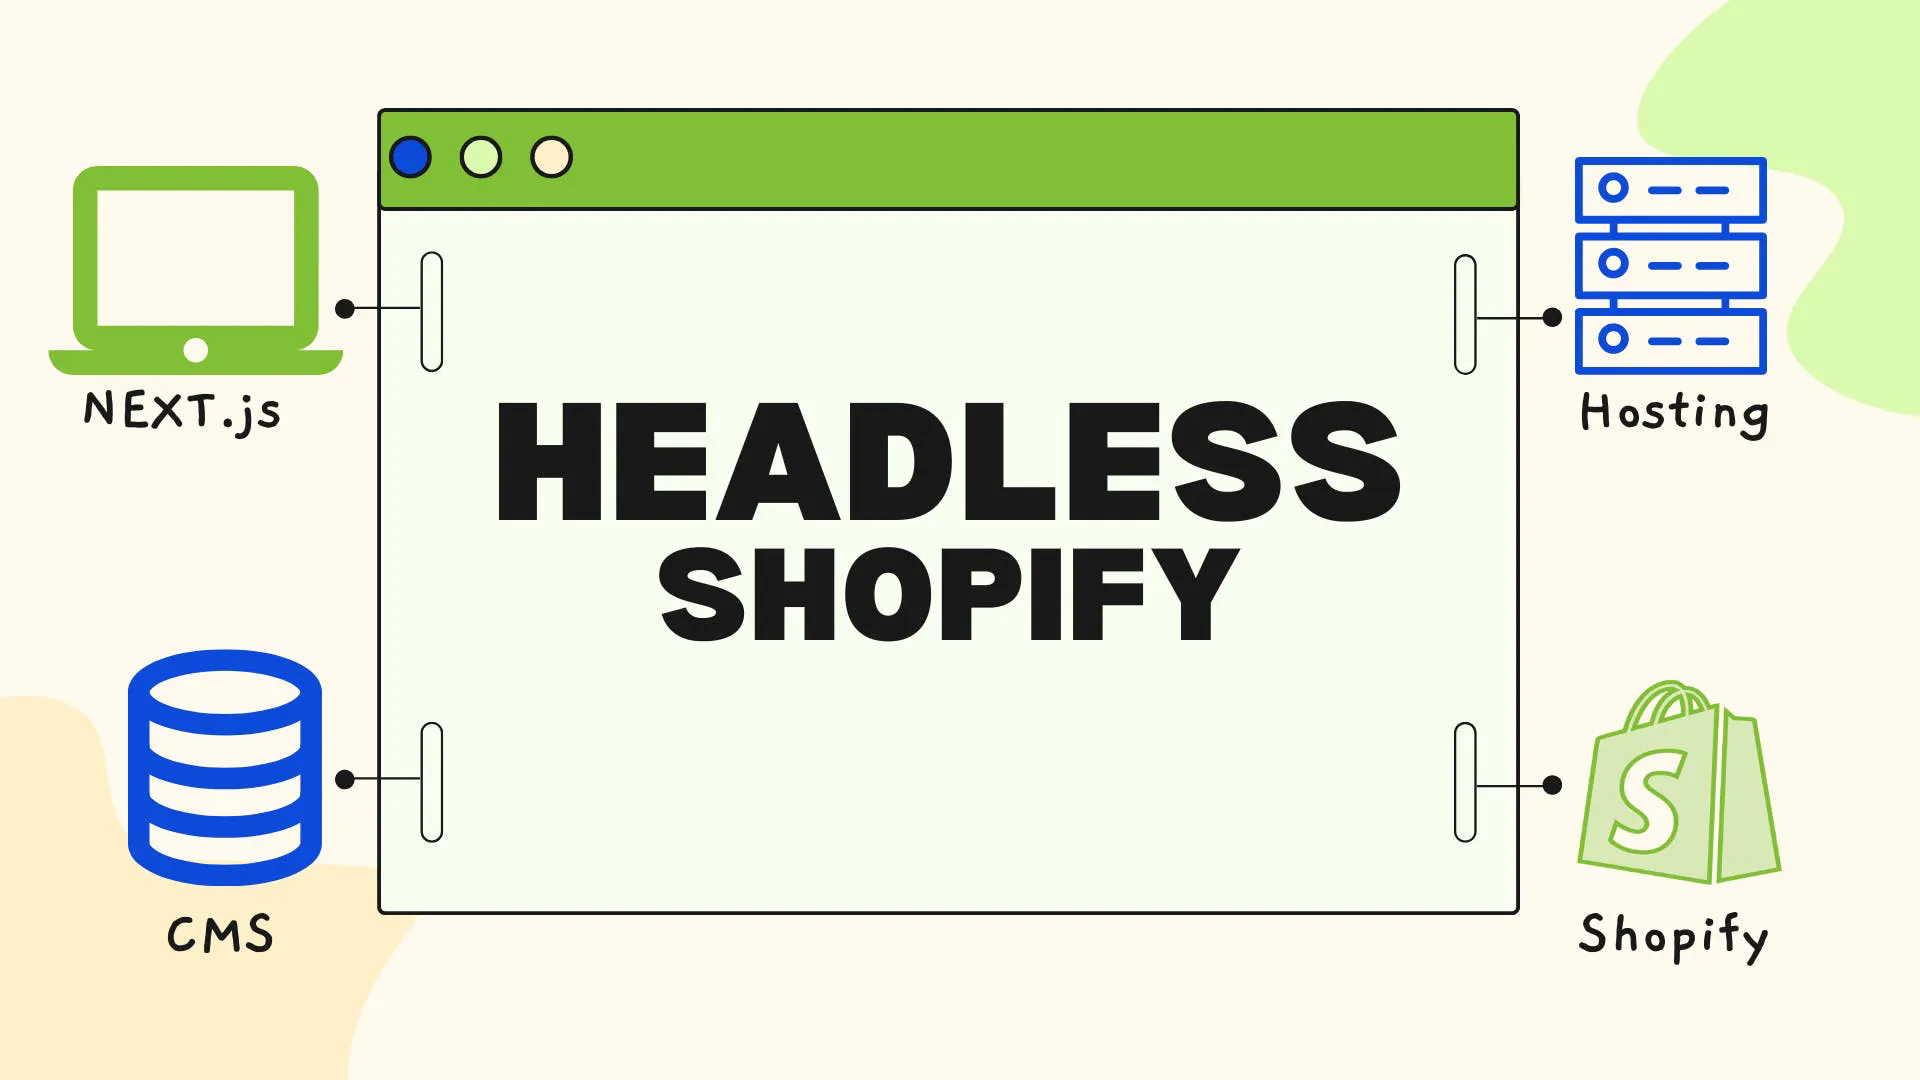 How Shopify embraces this concept